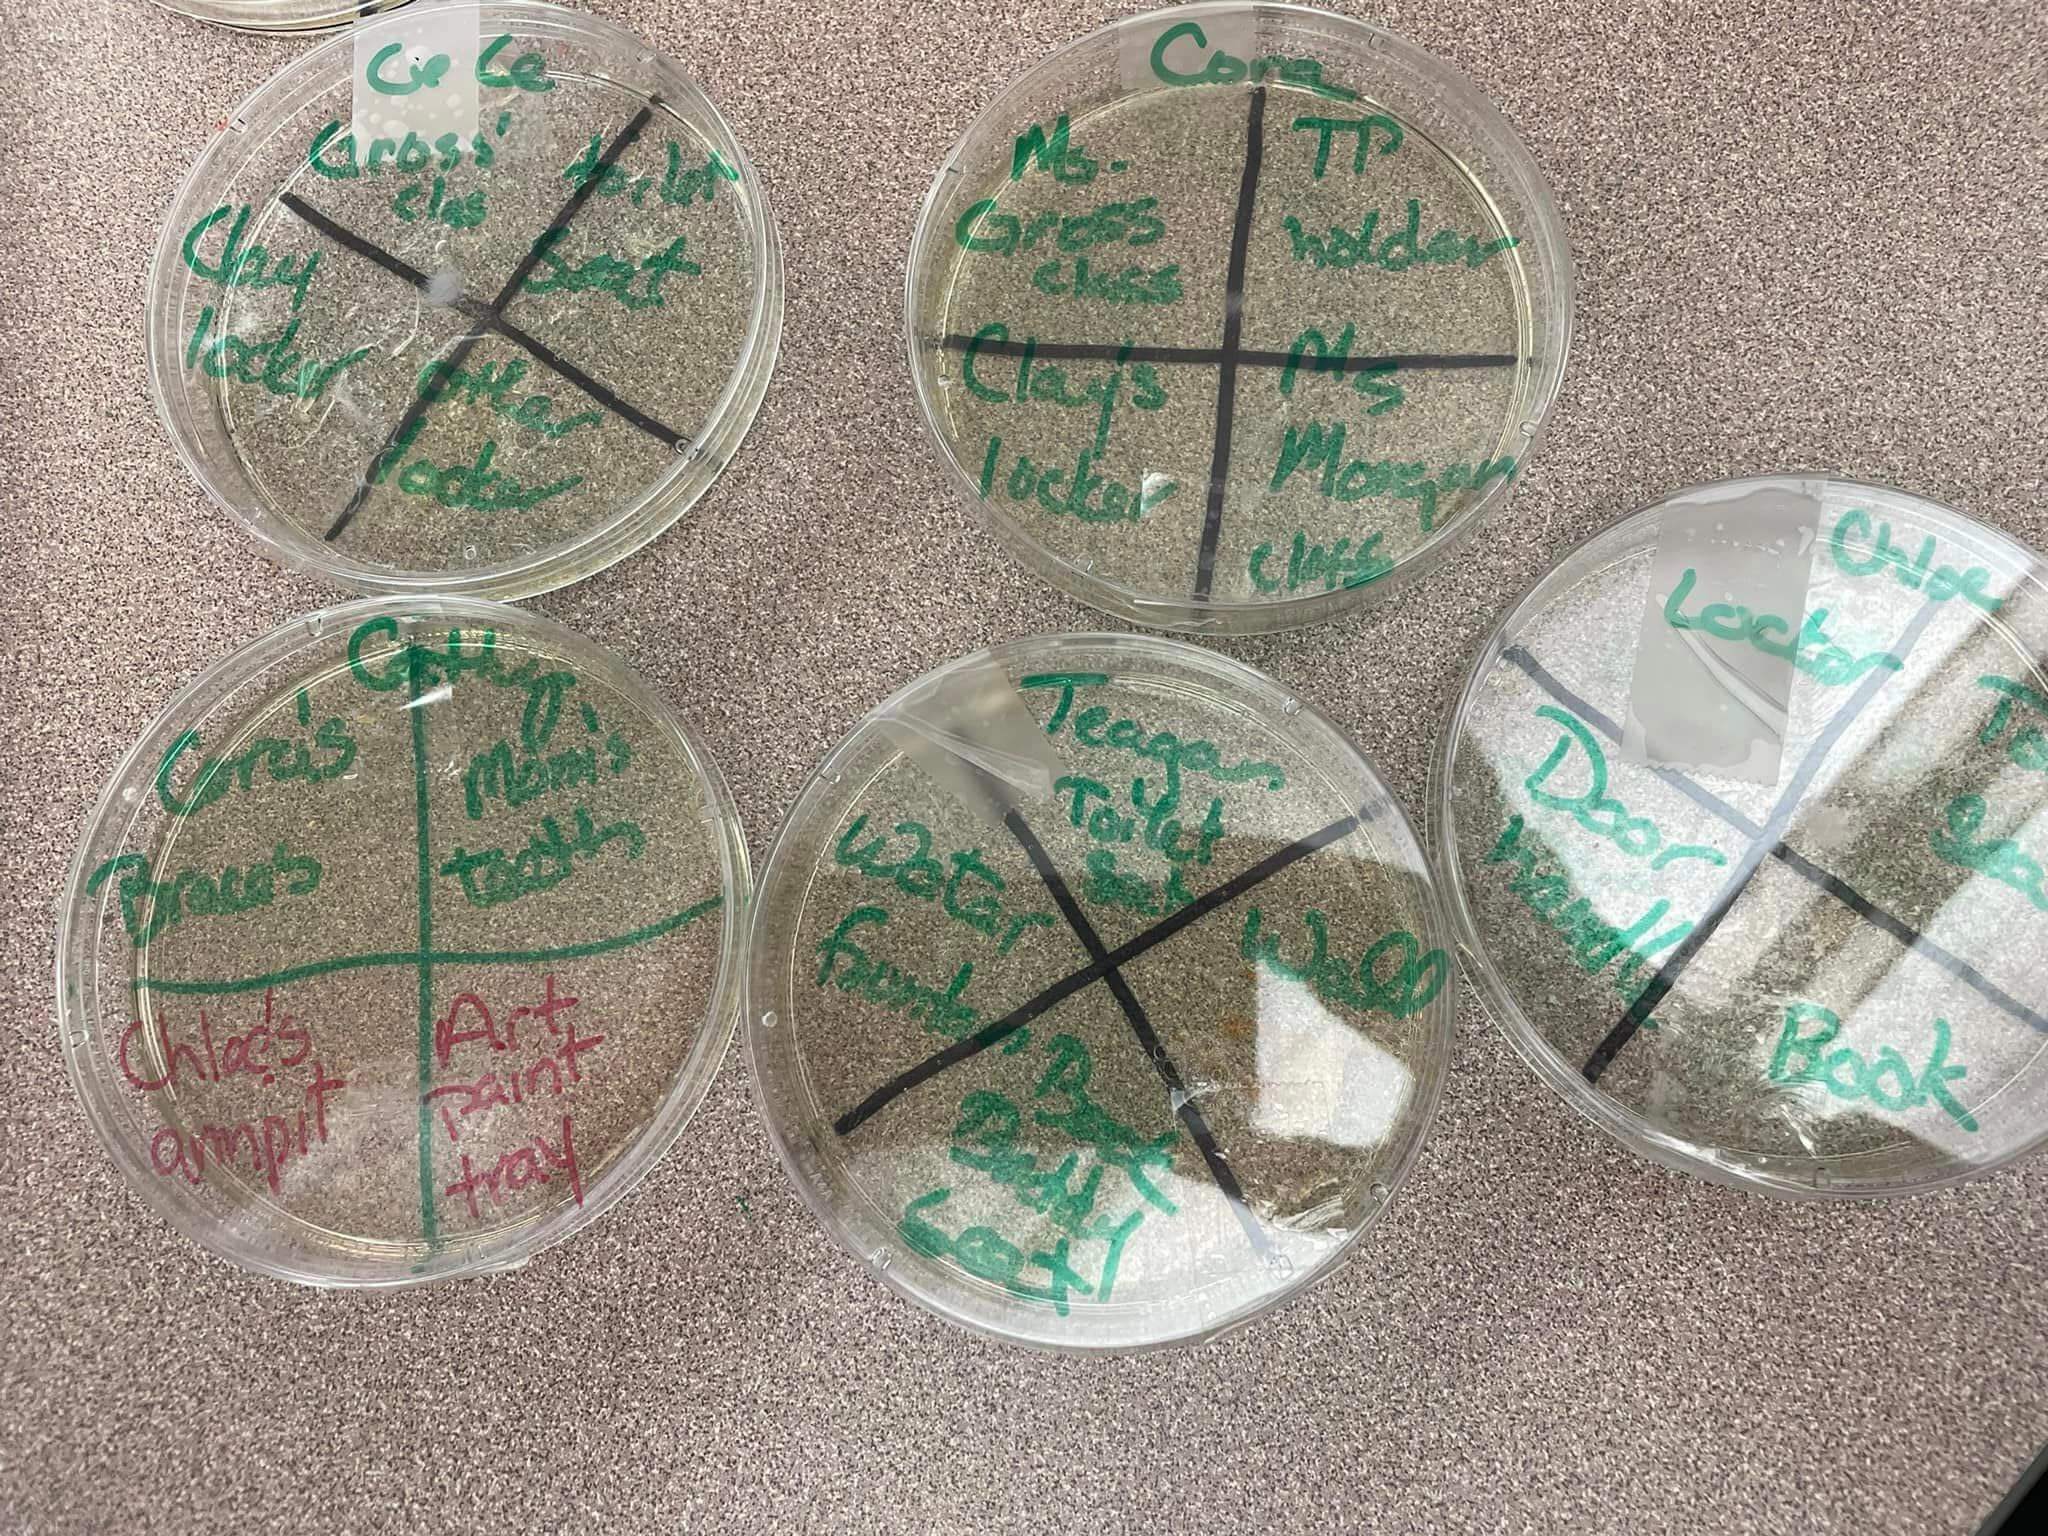 petri dishes labeled with where swabbed